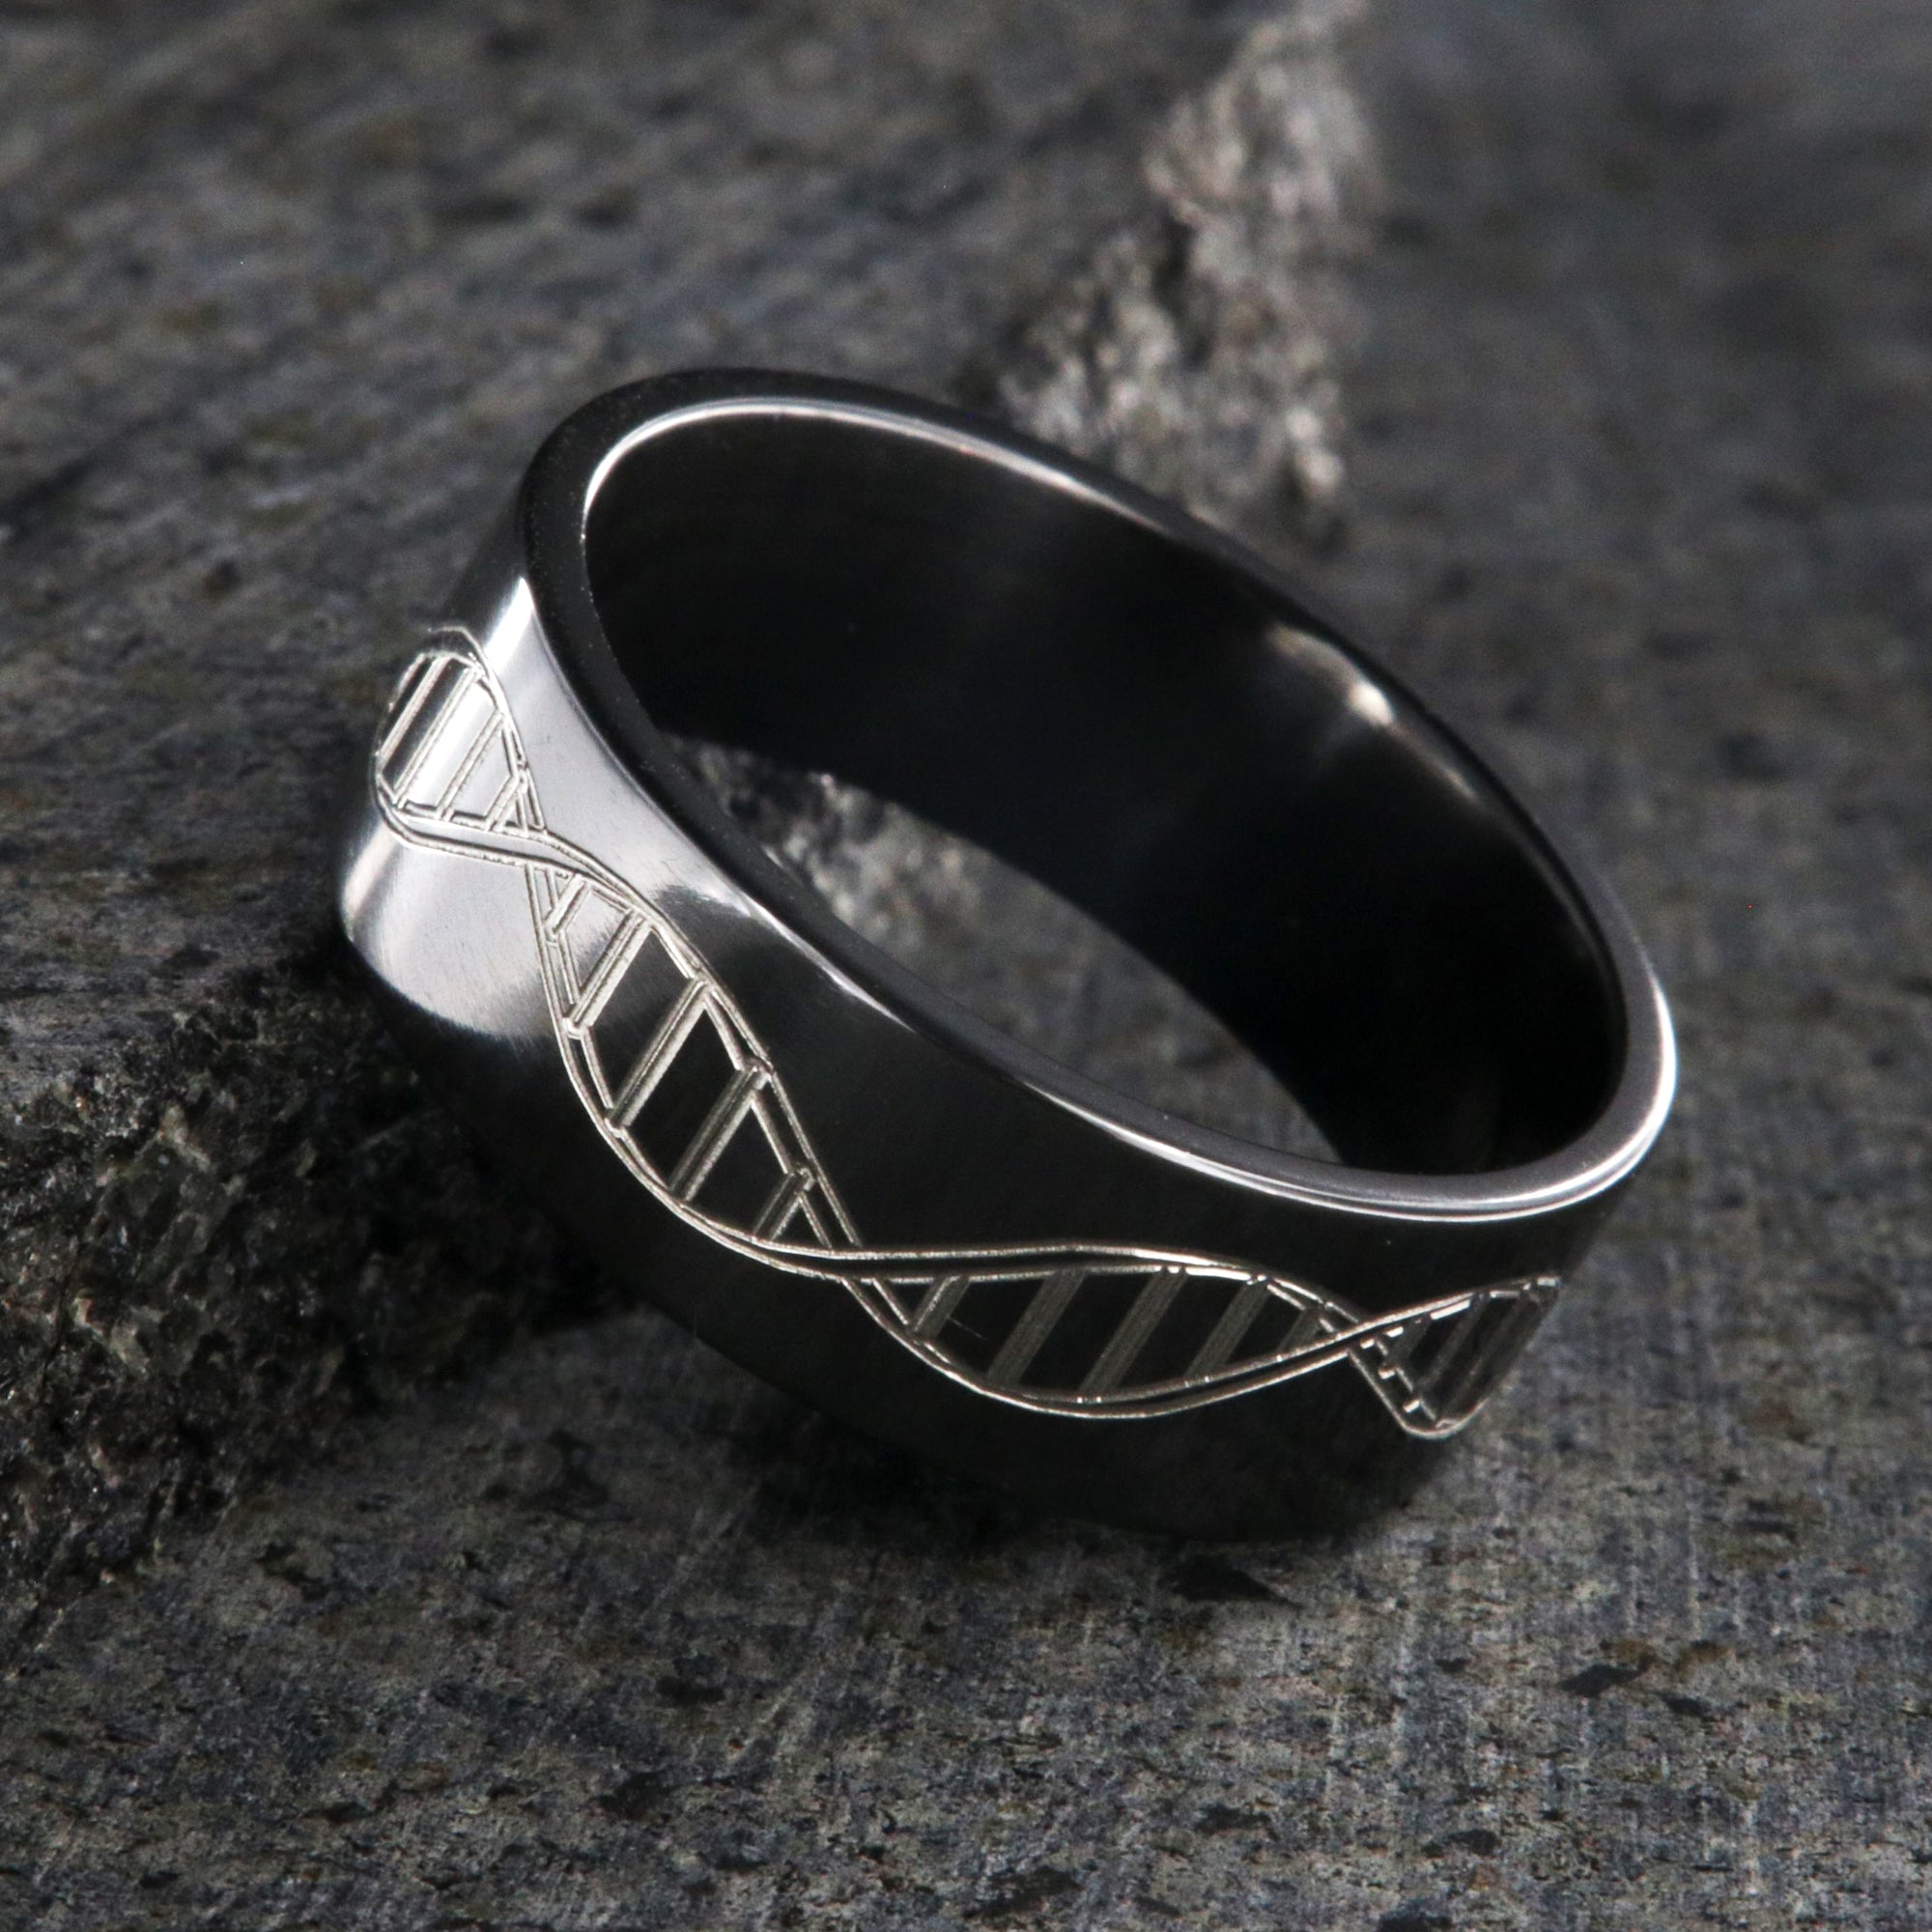 8mm wide black zirconium wedding ring with an etched DNA design